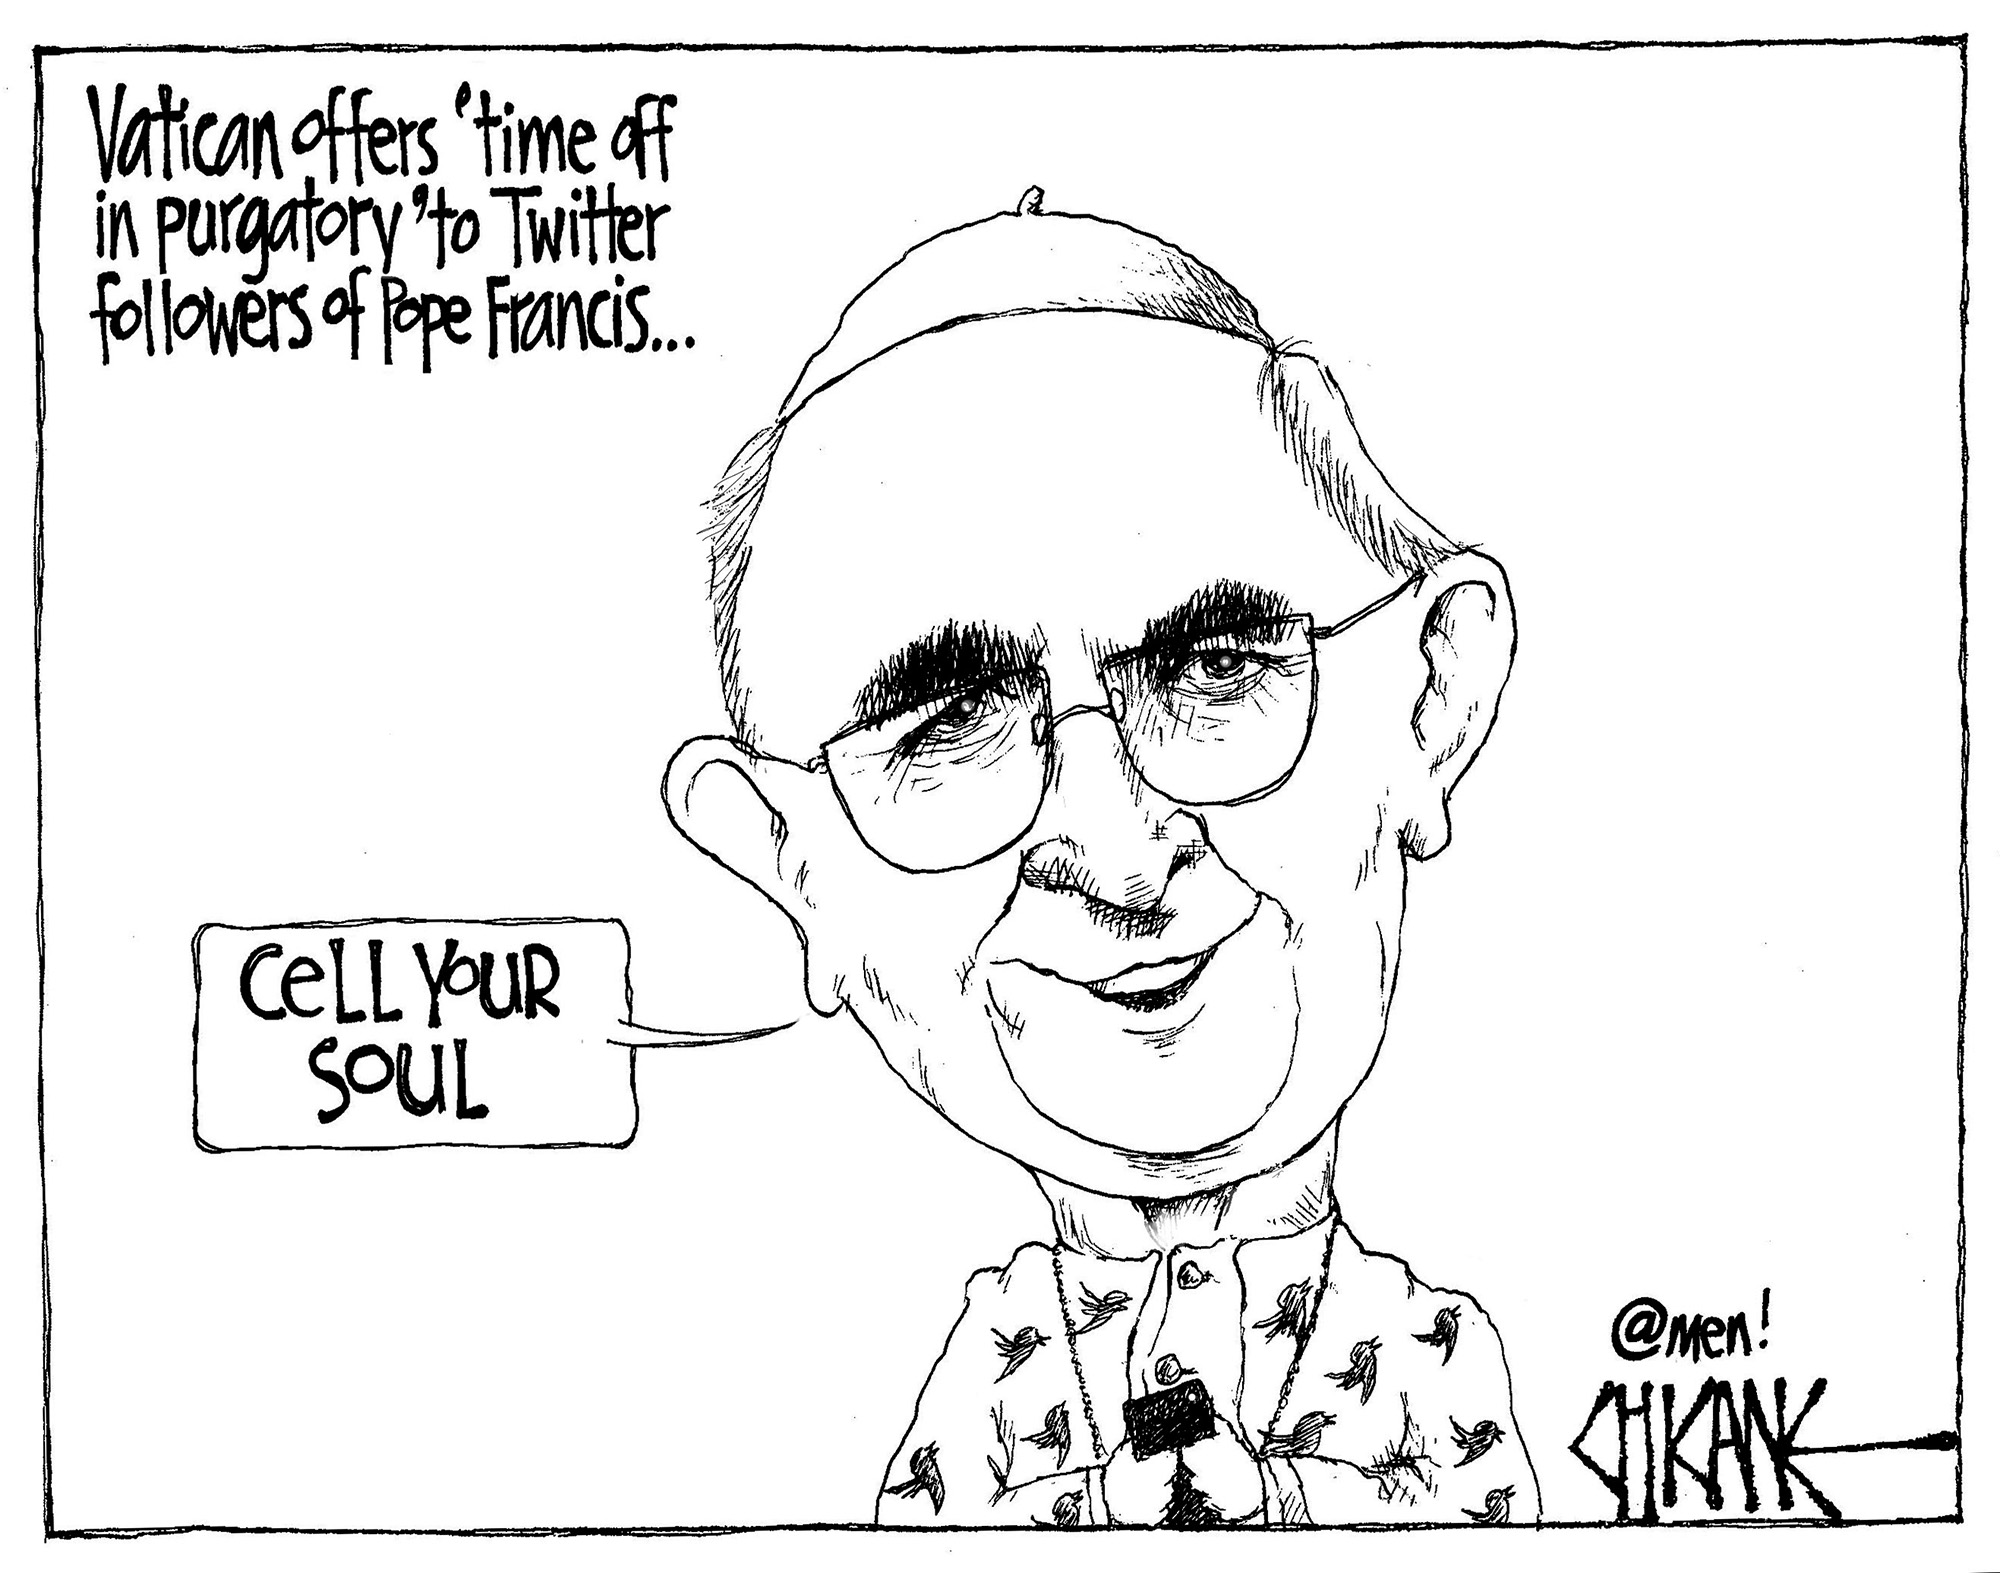 Vatican offers time off in purgatory; to Twitter followers of Pope Francis, Pope Francis caricature cartoon. Cartoon by Chicane.